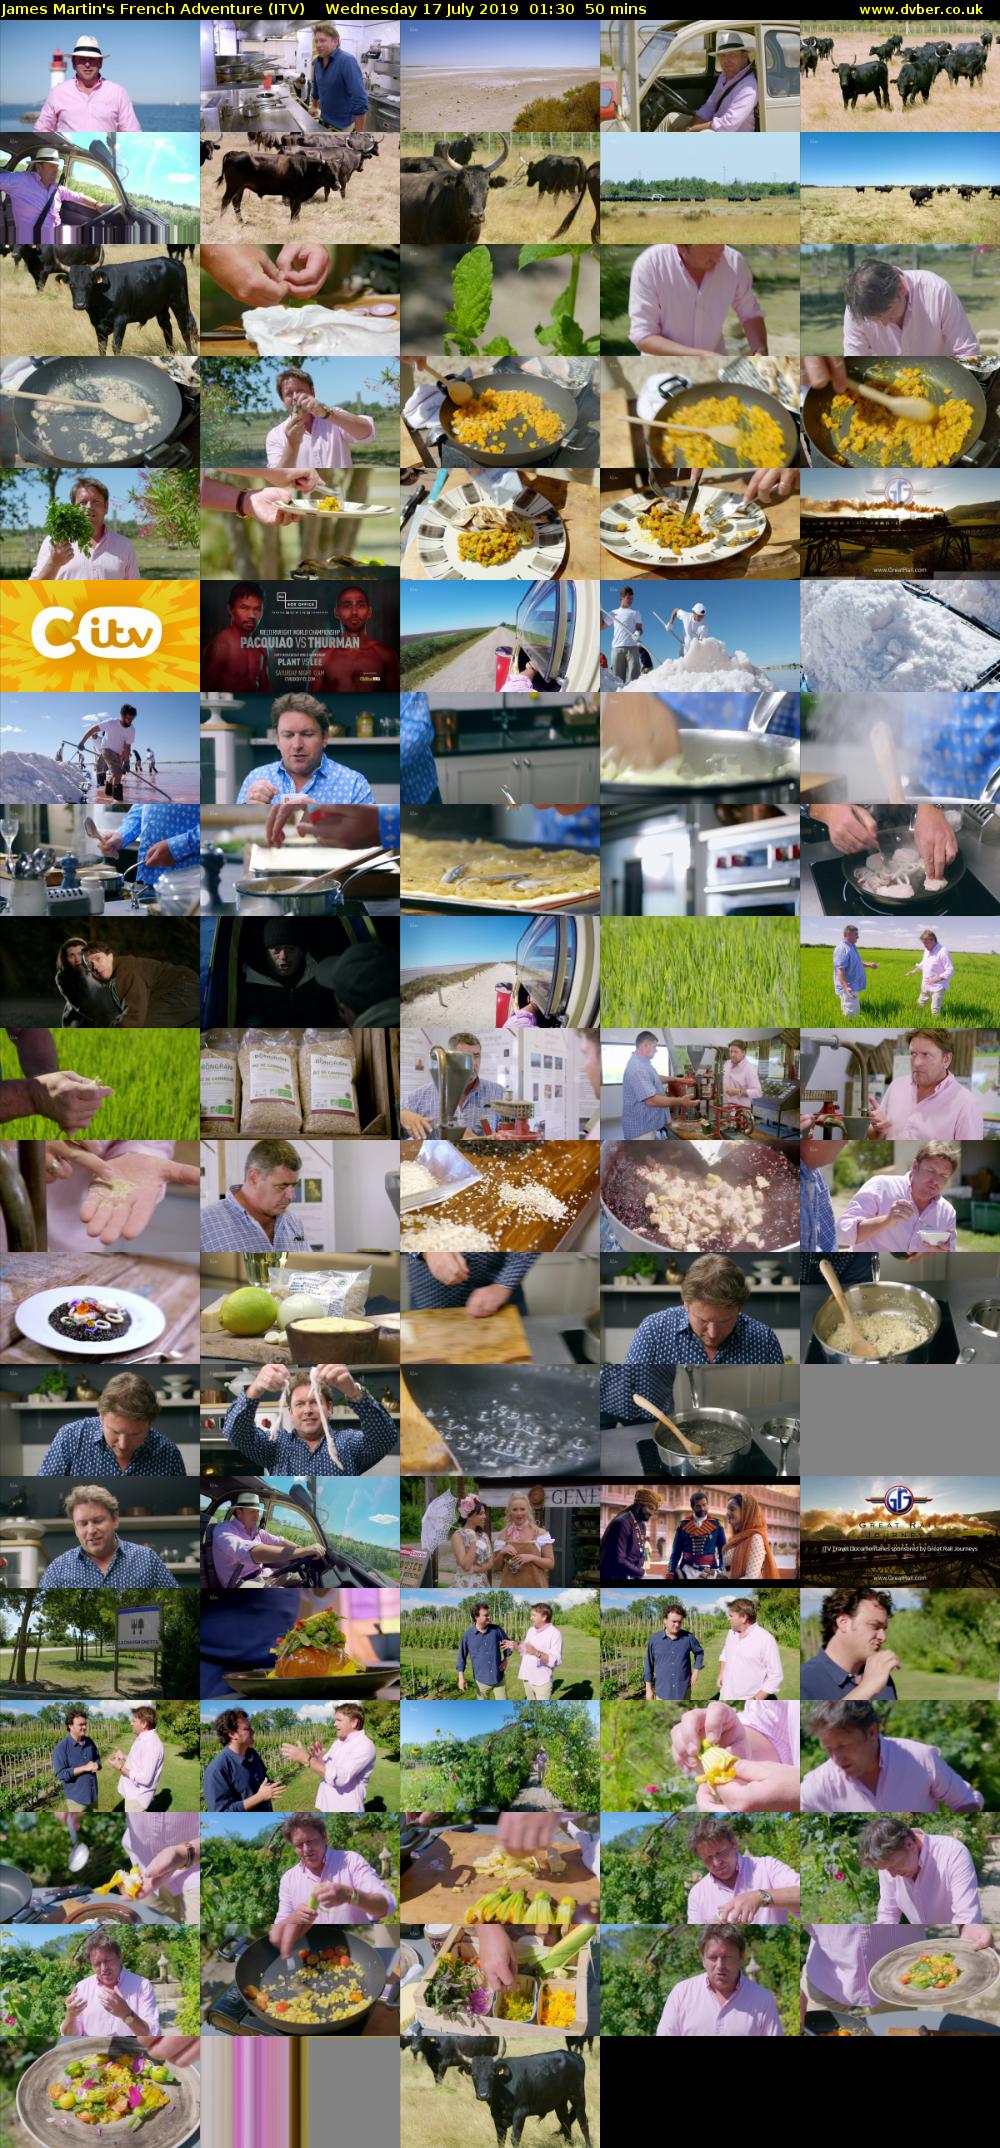 James Martin's French Adventure (ITV) Wednesday 17 July 2019 01:30 - 02:20